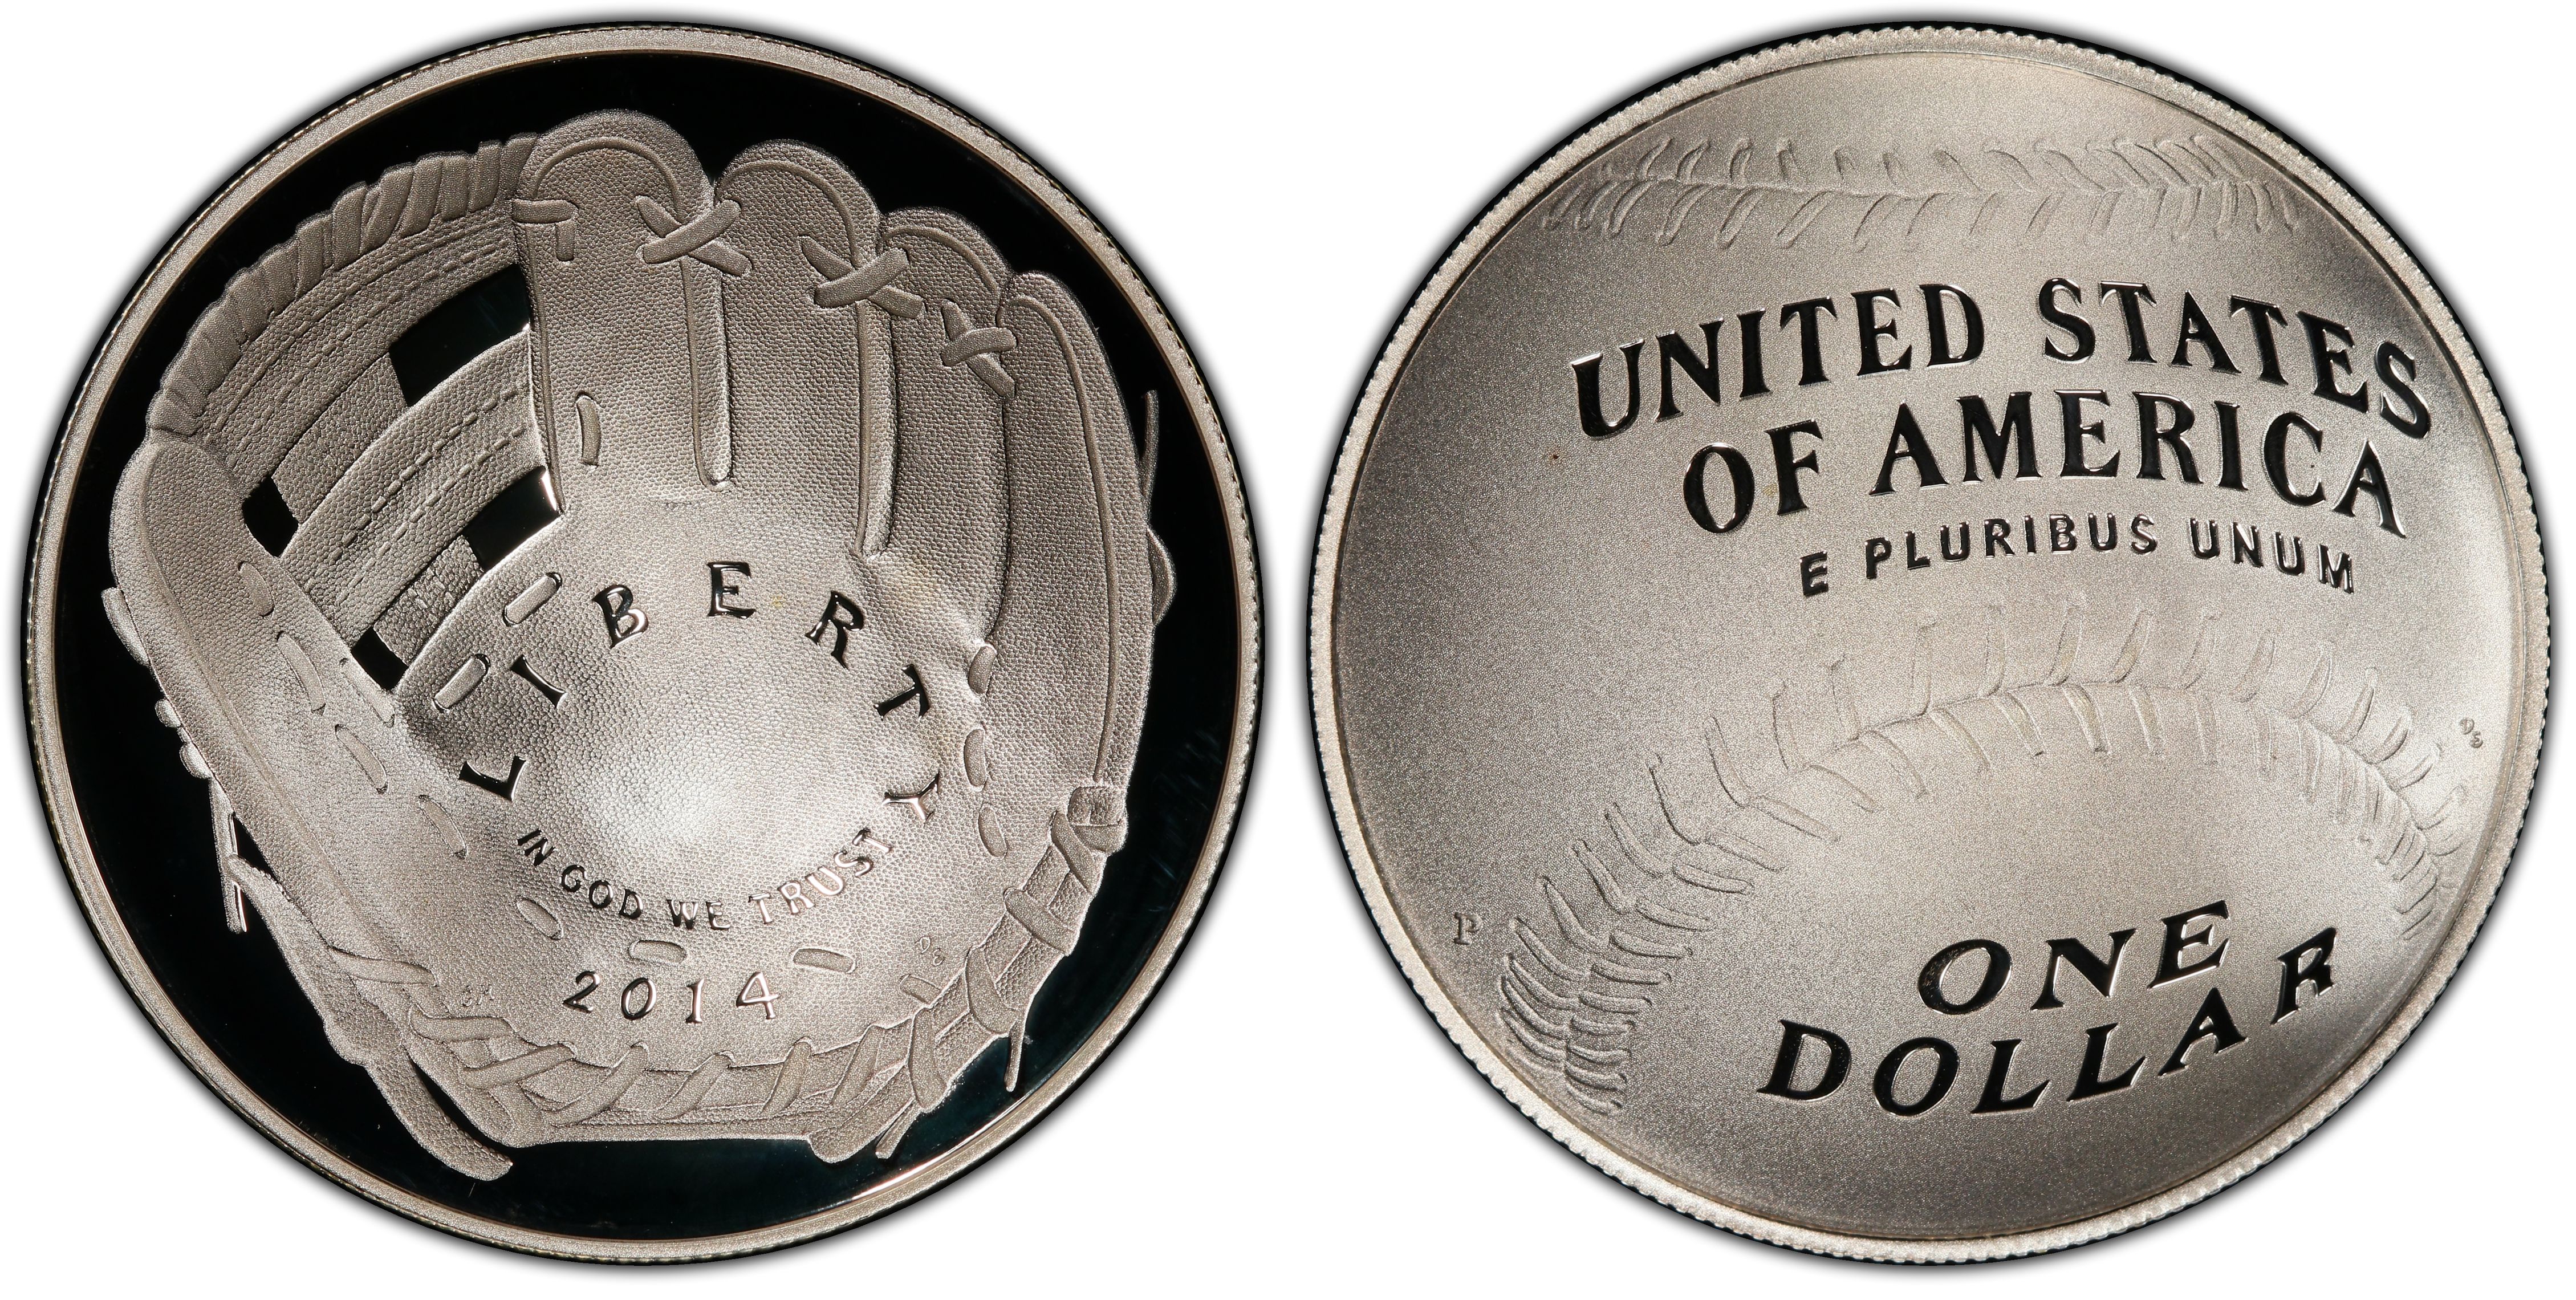 2014 P $1 Baseball Hall of Fame Commemorative Silver Dollar Choice Proof